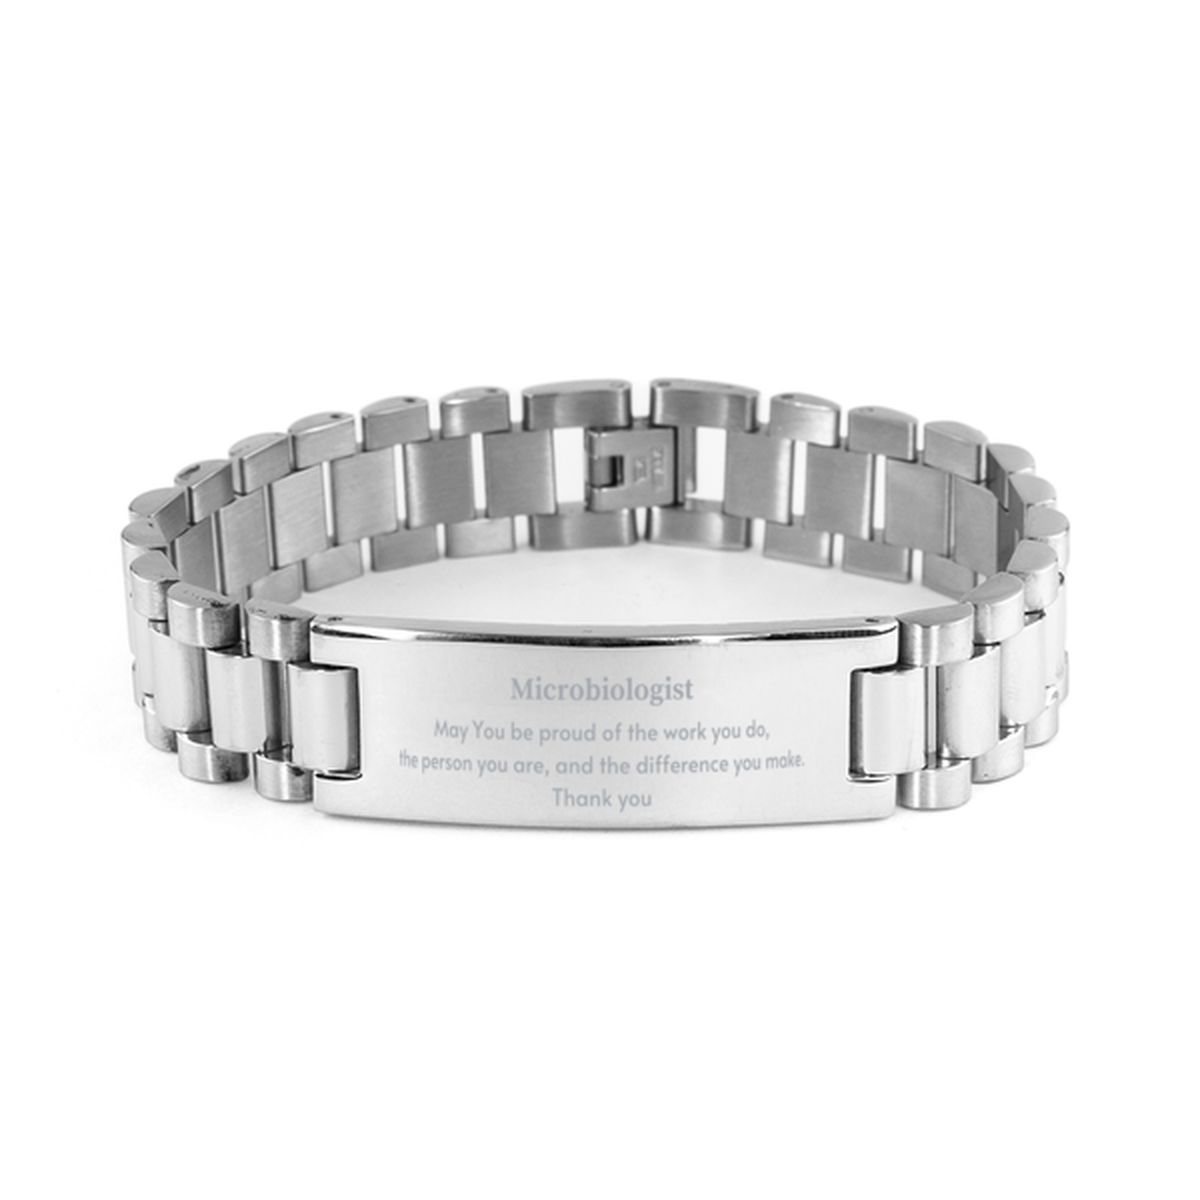 Heartwarming Ladder Stainless Steel Bracelet Retirement Coworkers Gifts for Microbiologist, Microbiologist May You be proud of the work you do, the person you are Gifts for Boss Men Women Friends